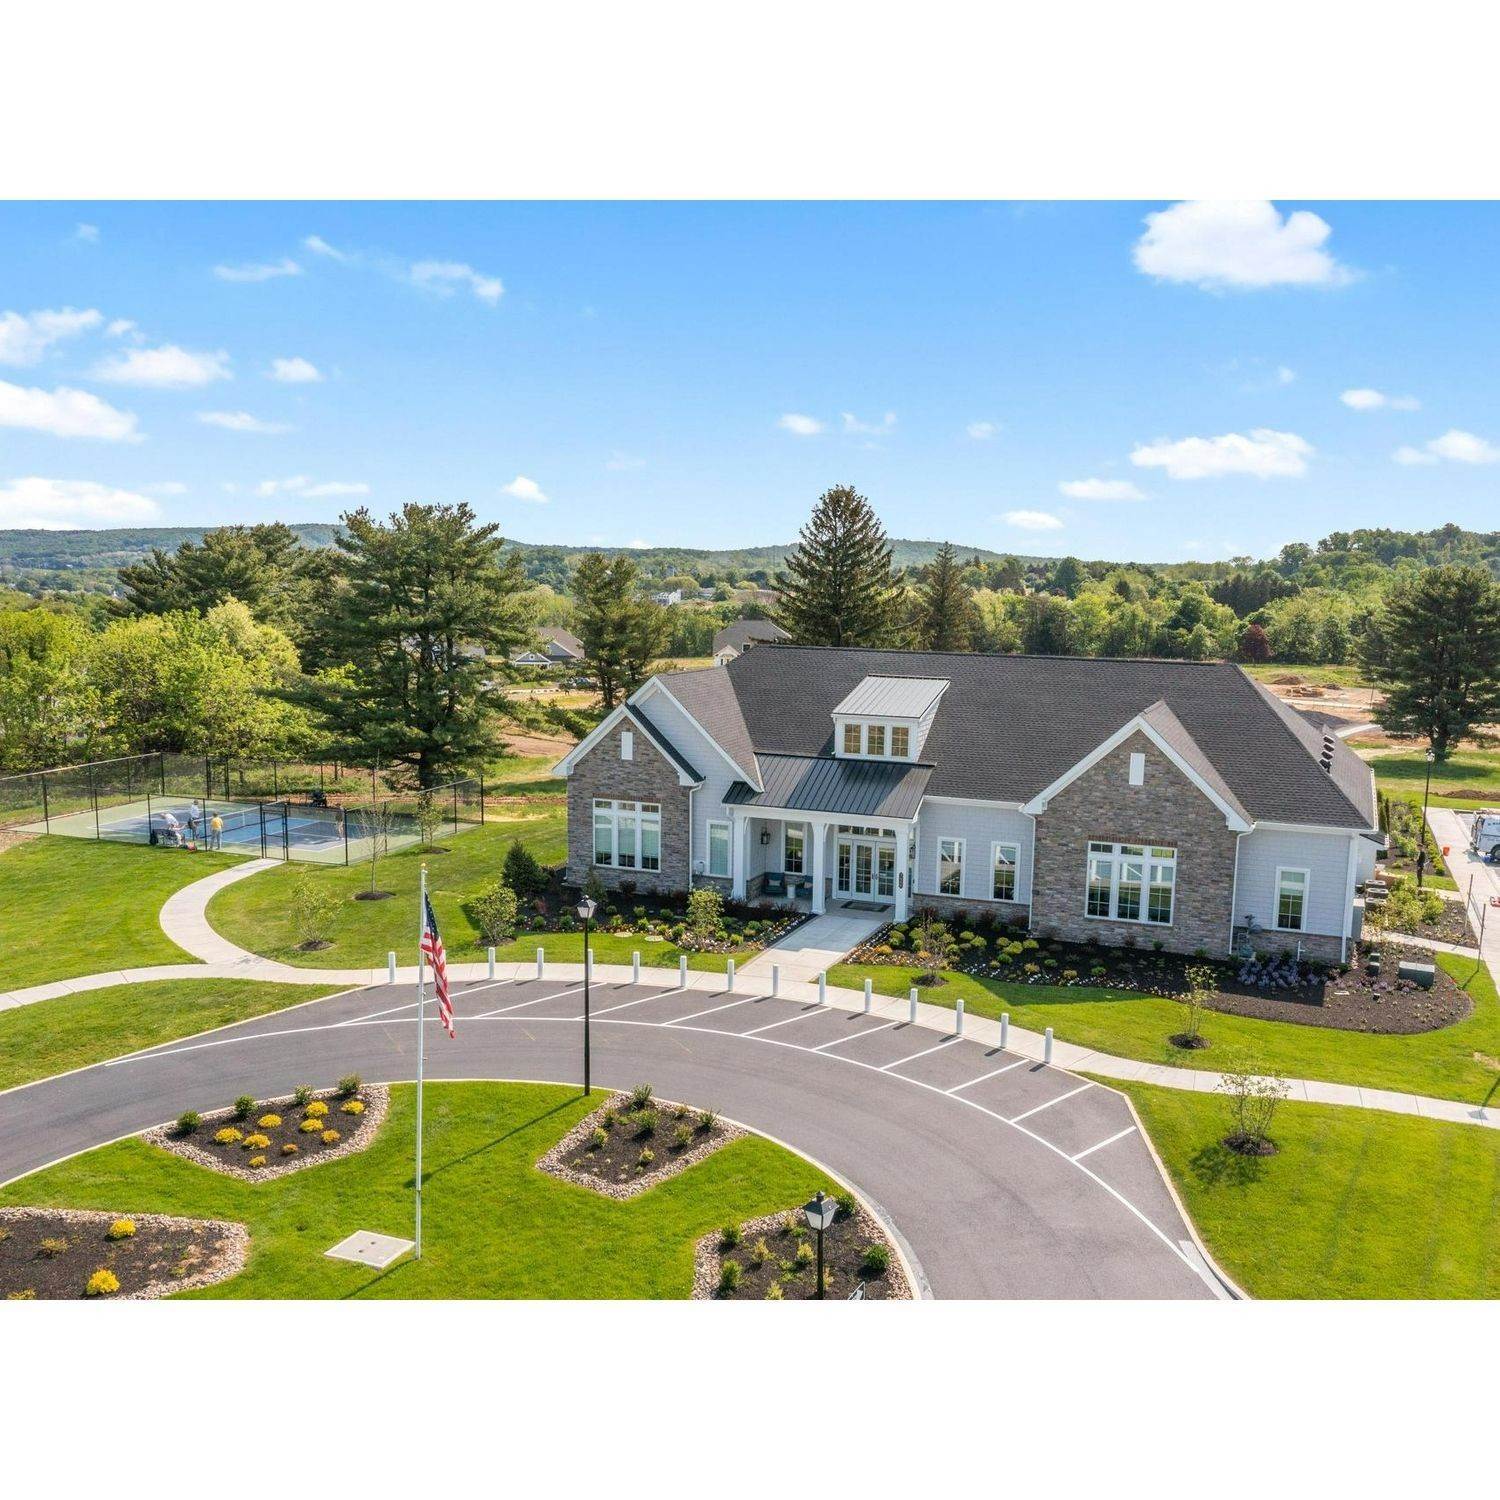 2. Locust Valley 55+ Living xây dựng tại 7432 Presidents Drive, Coopersburg, PA 18036